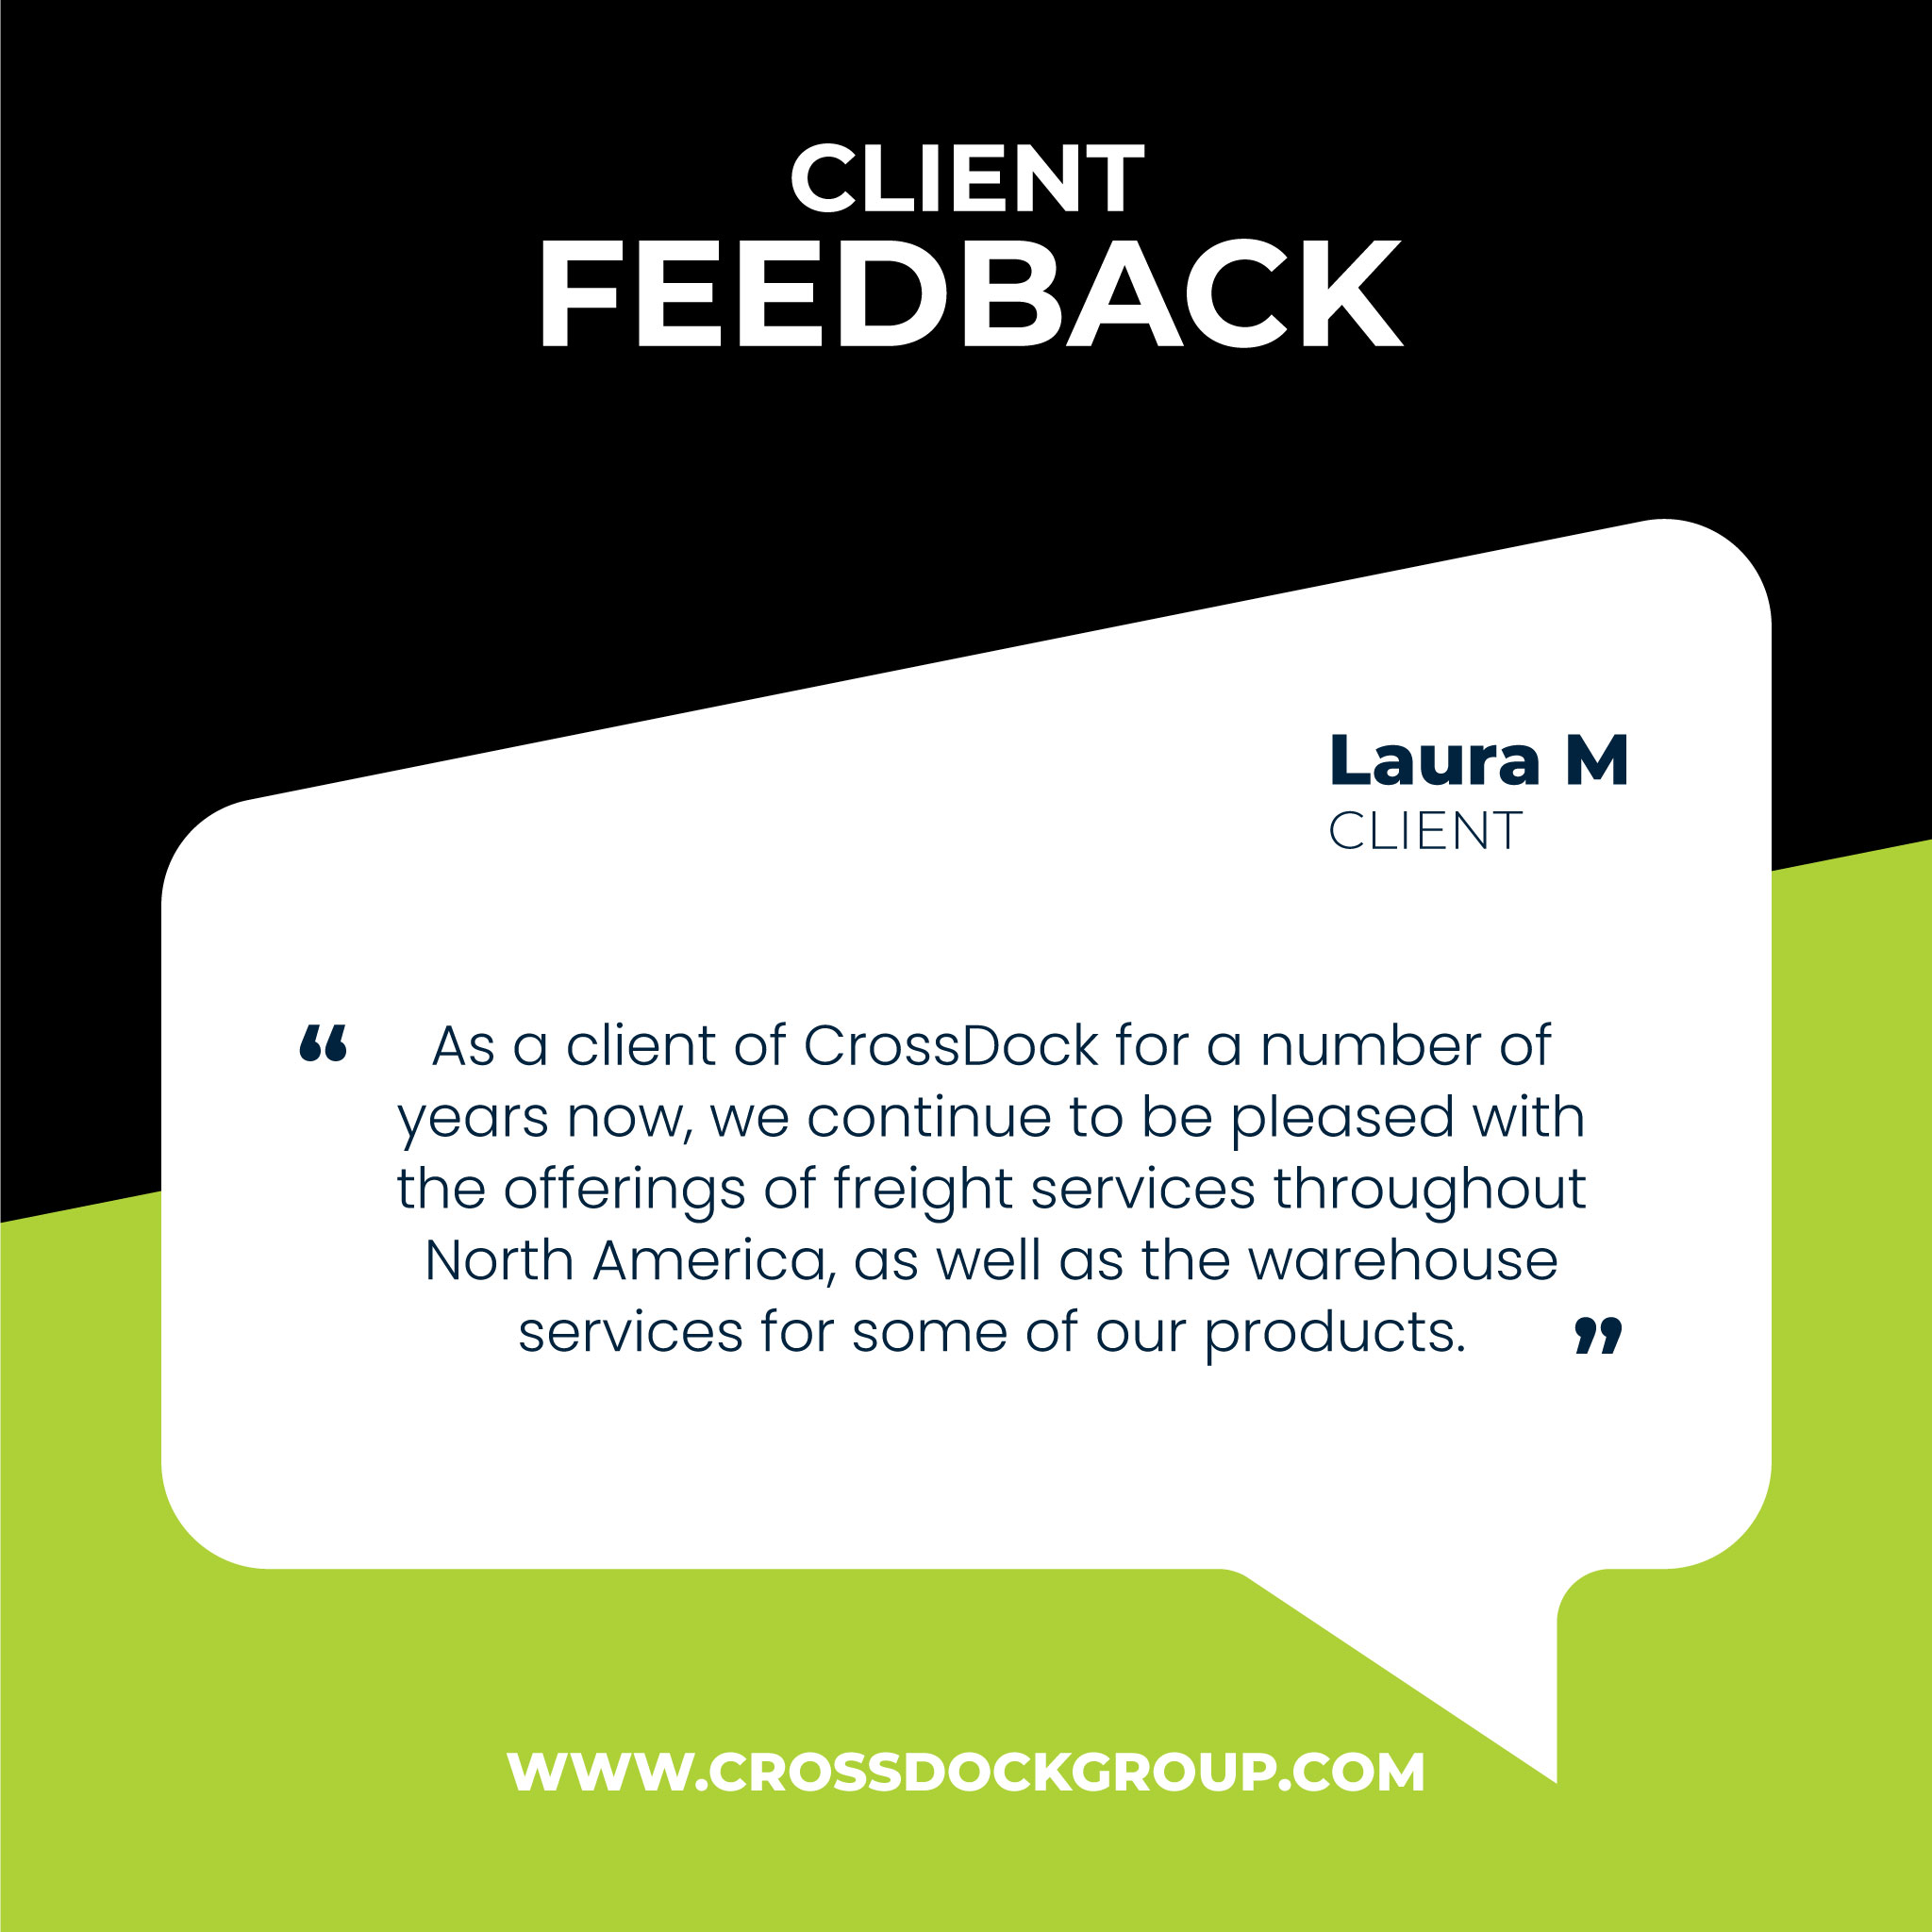 Customer satisfaction is our top priority, and this testimonial reaffirms that we are on the right track. We are constantly striving to enhance our offerings and provide the best possible experience for our valued customers like Laura. We Get It. Delivered.

#HappyCustomer
#CustomerTestimonial
#LoveOurCustomers
#FeedbackFriday
#ClientLove
#TestimonialTuesday
#CustomerExperience
#SatisfiedCustomer
#FiveStarReview
#CustomerAppreciation